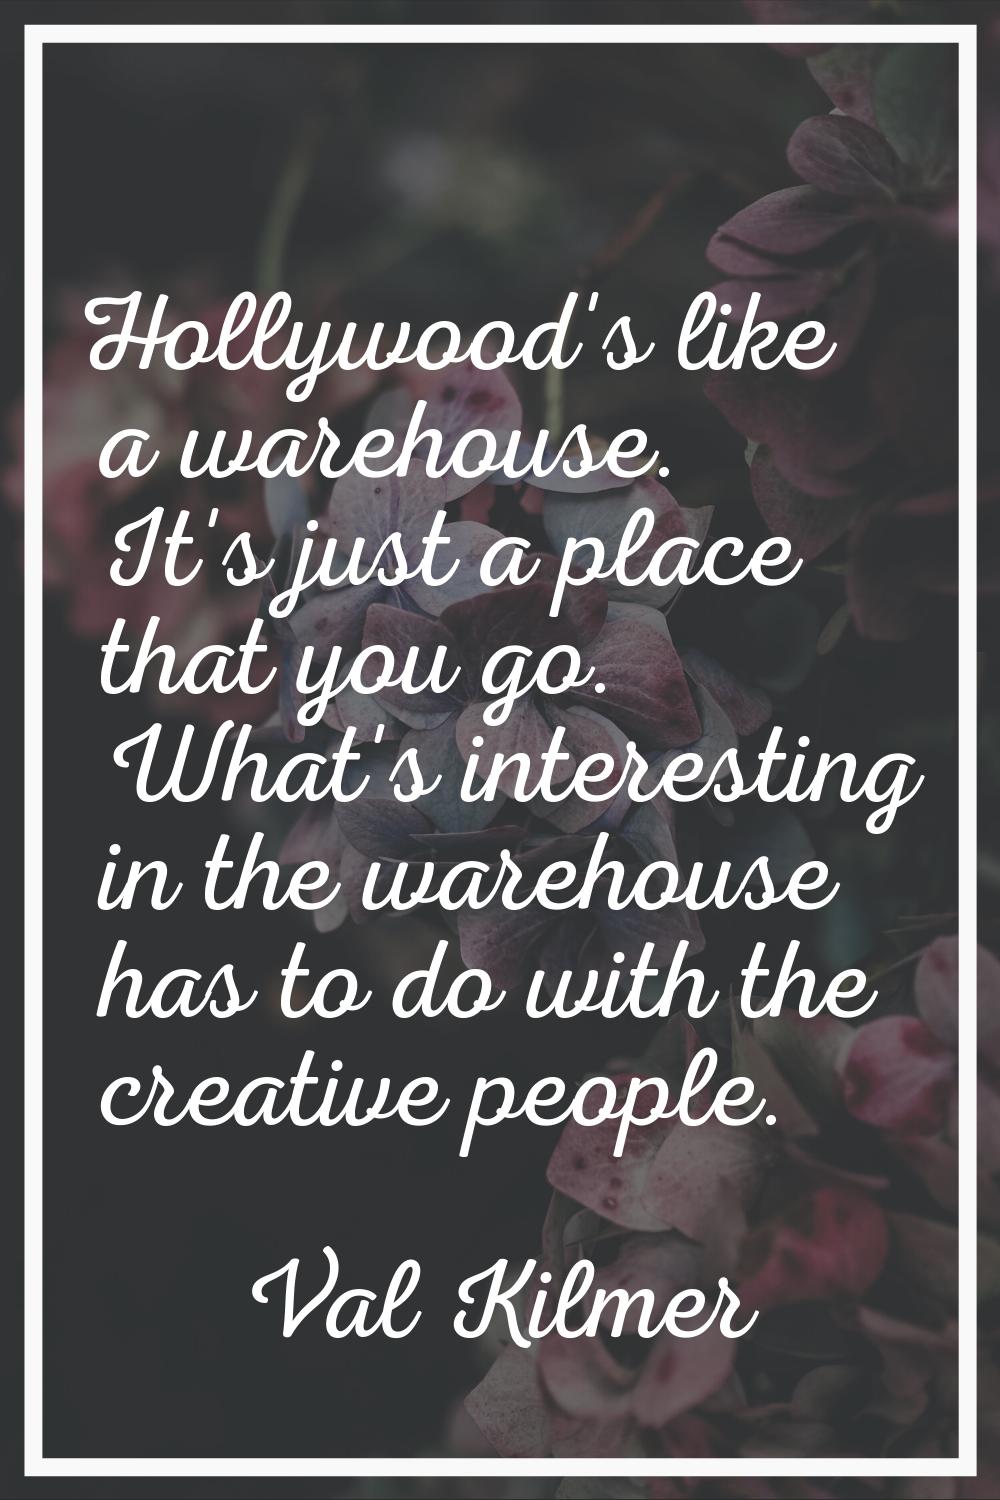 Hollywood's like a warehouse. It's just a place that you go. What's interesting in the warehouse ha